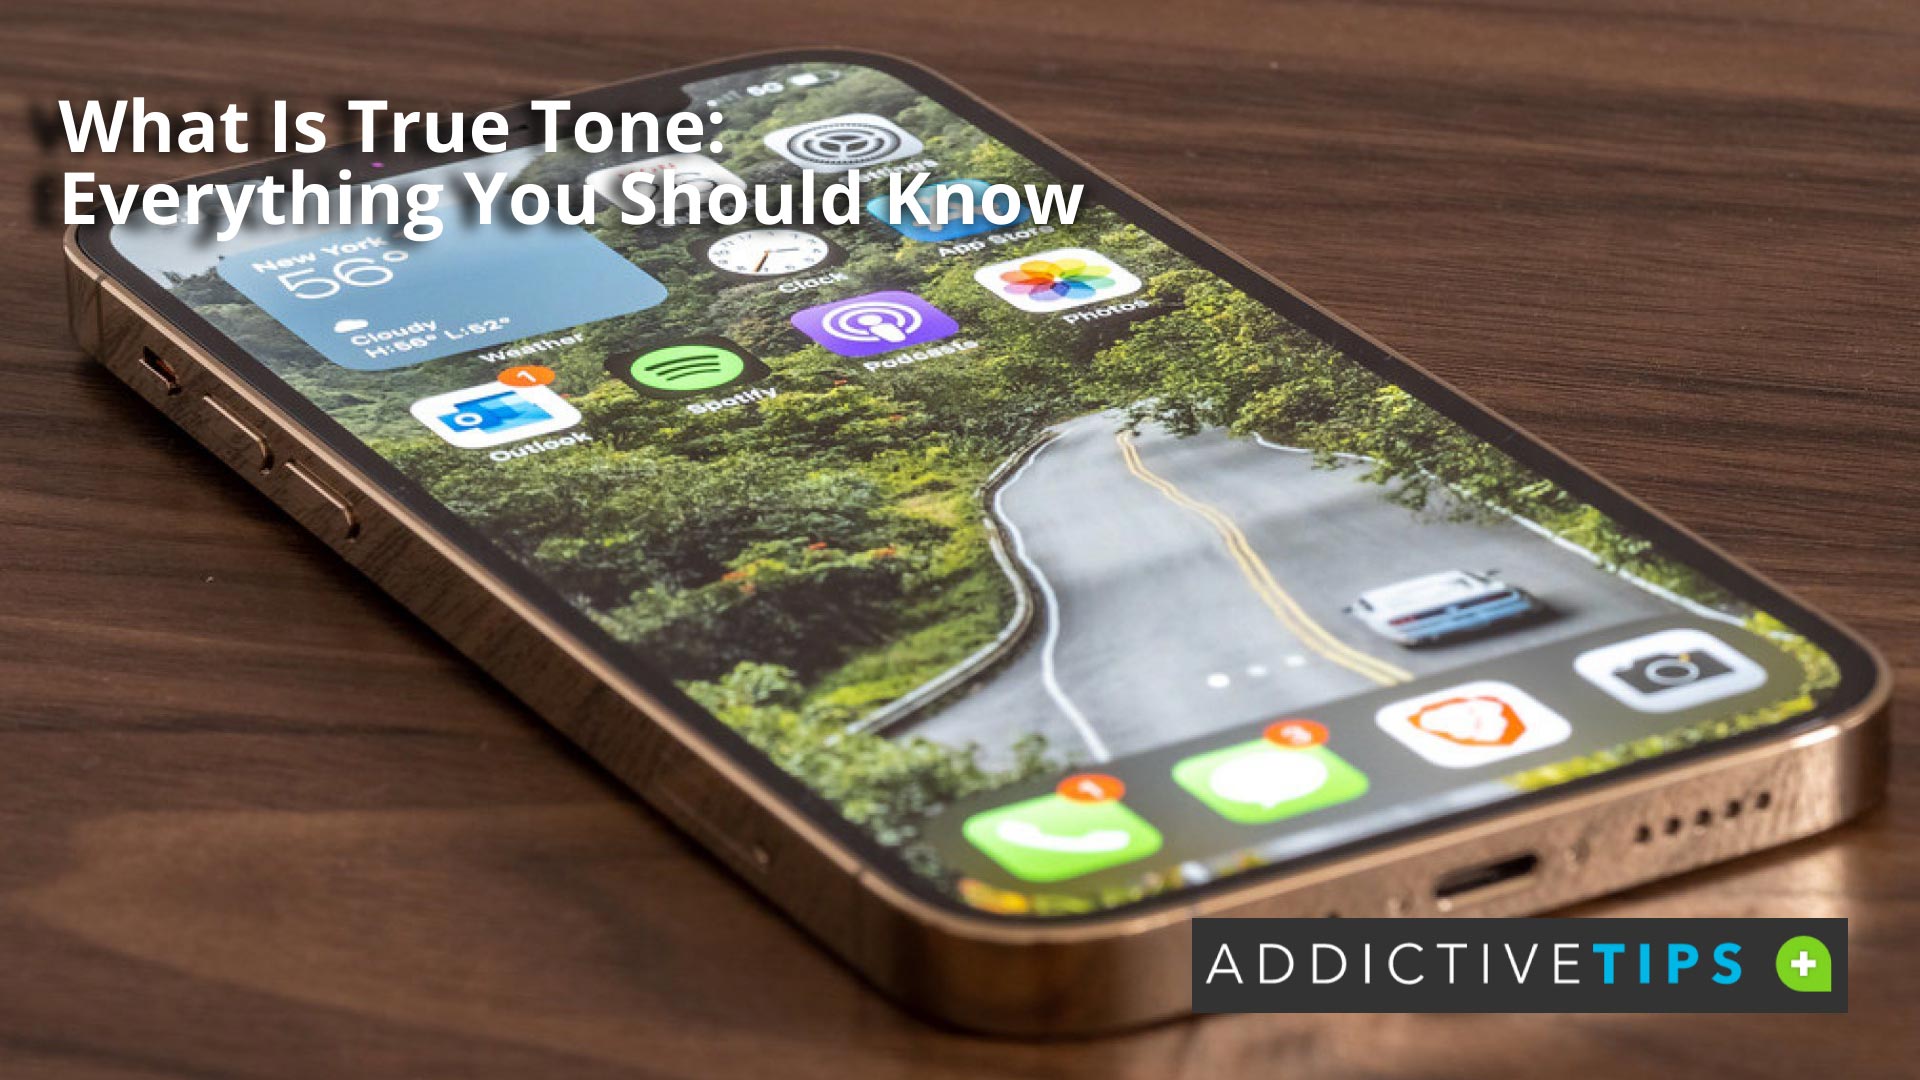 What Is True Tone and How Does Work - AddictiveTips